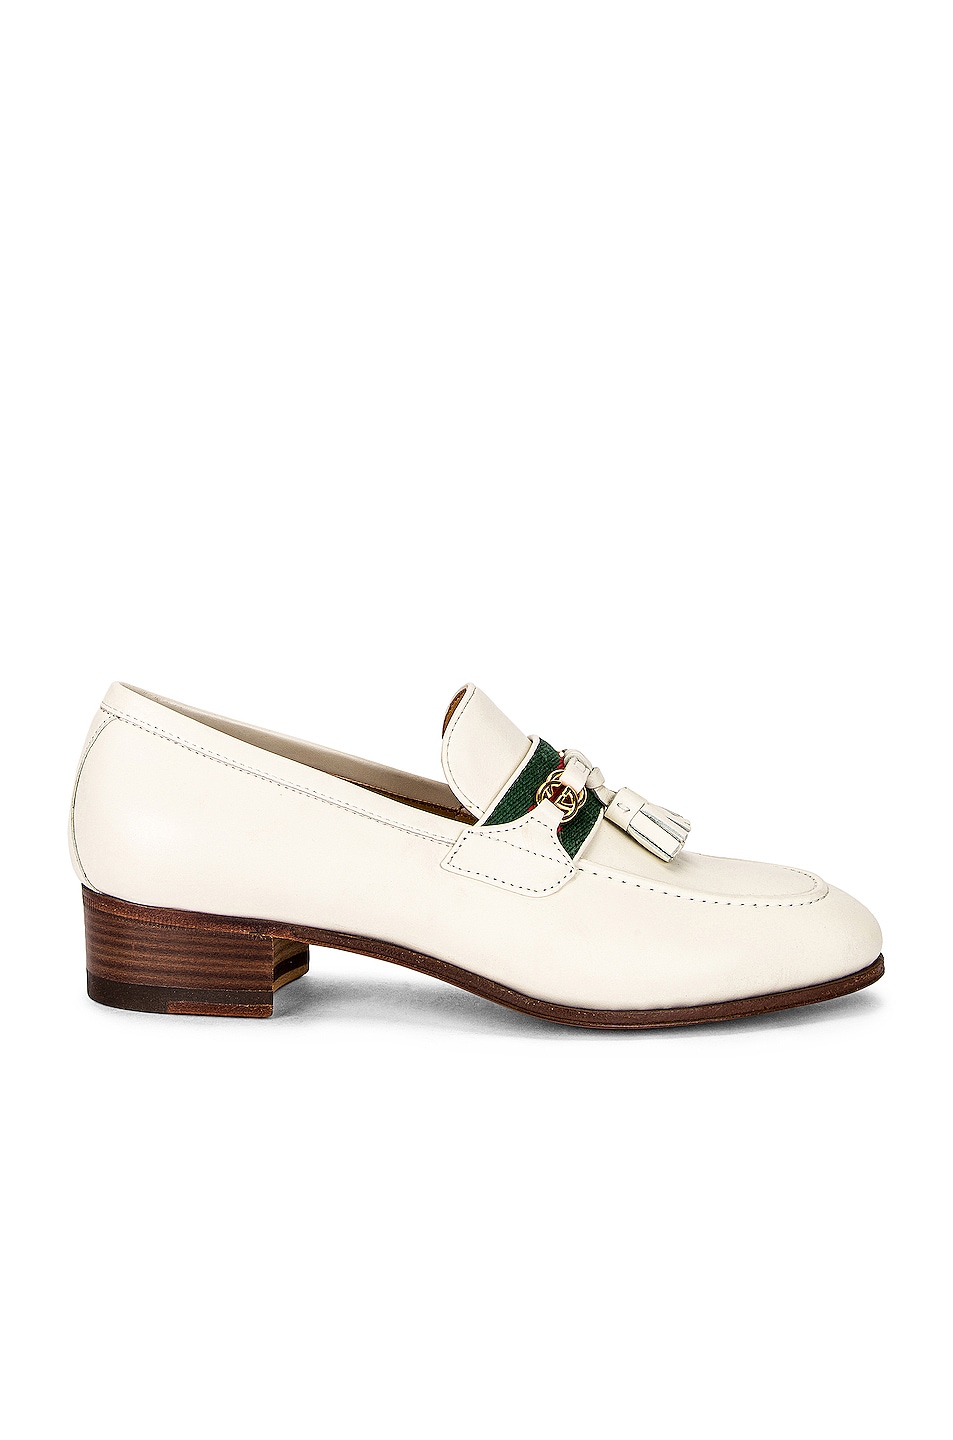 Gucci Paride Leather Moccasins in Dusty White | FWRD